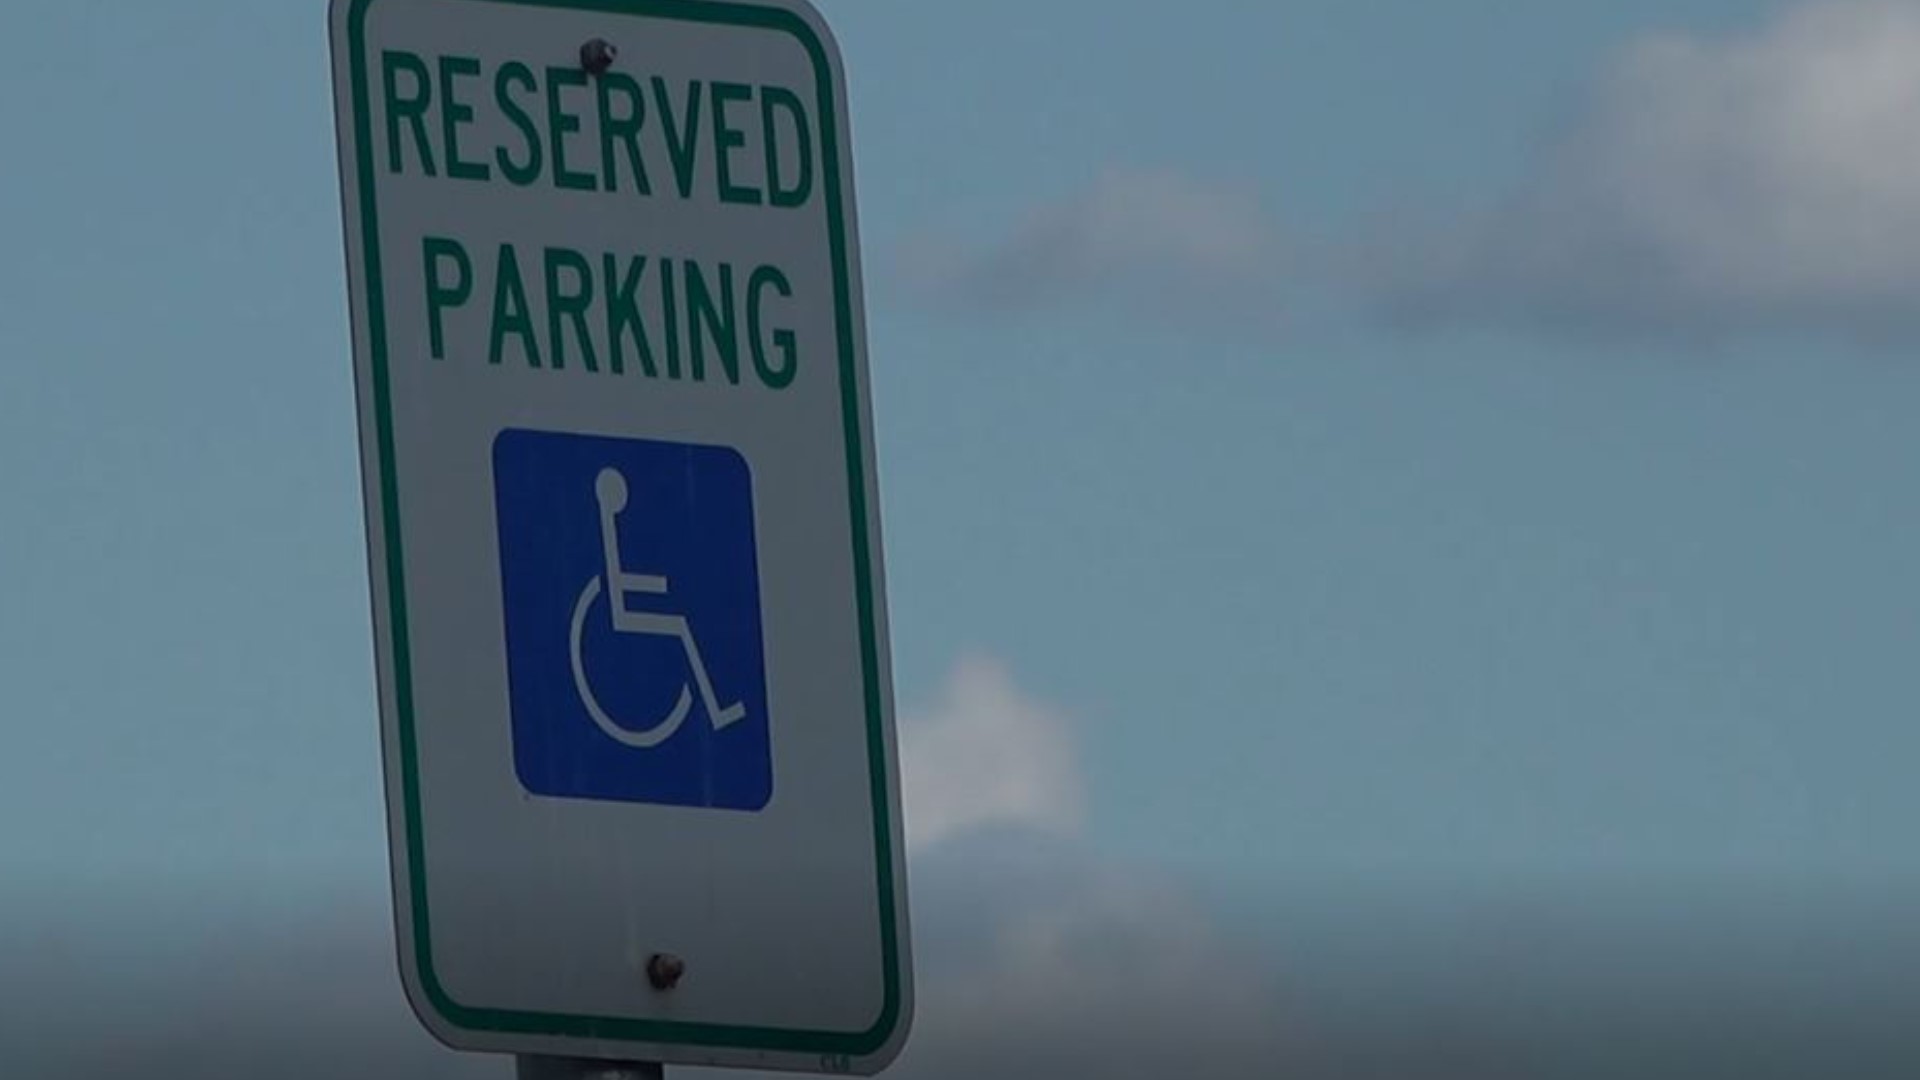 The law says disabled veterans will now have to hang their Americans with Disabilities Act placard in their vehicle in order to park in an ADA spot.